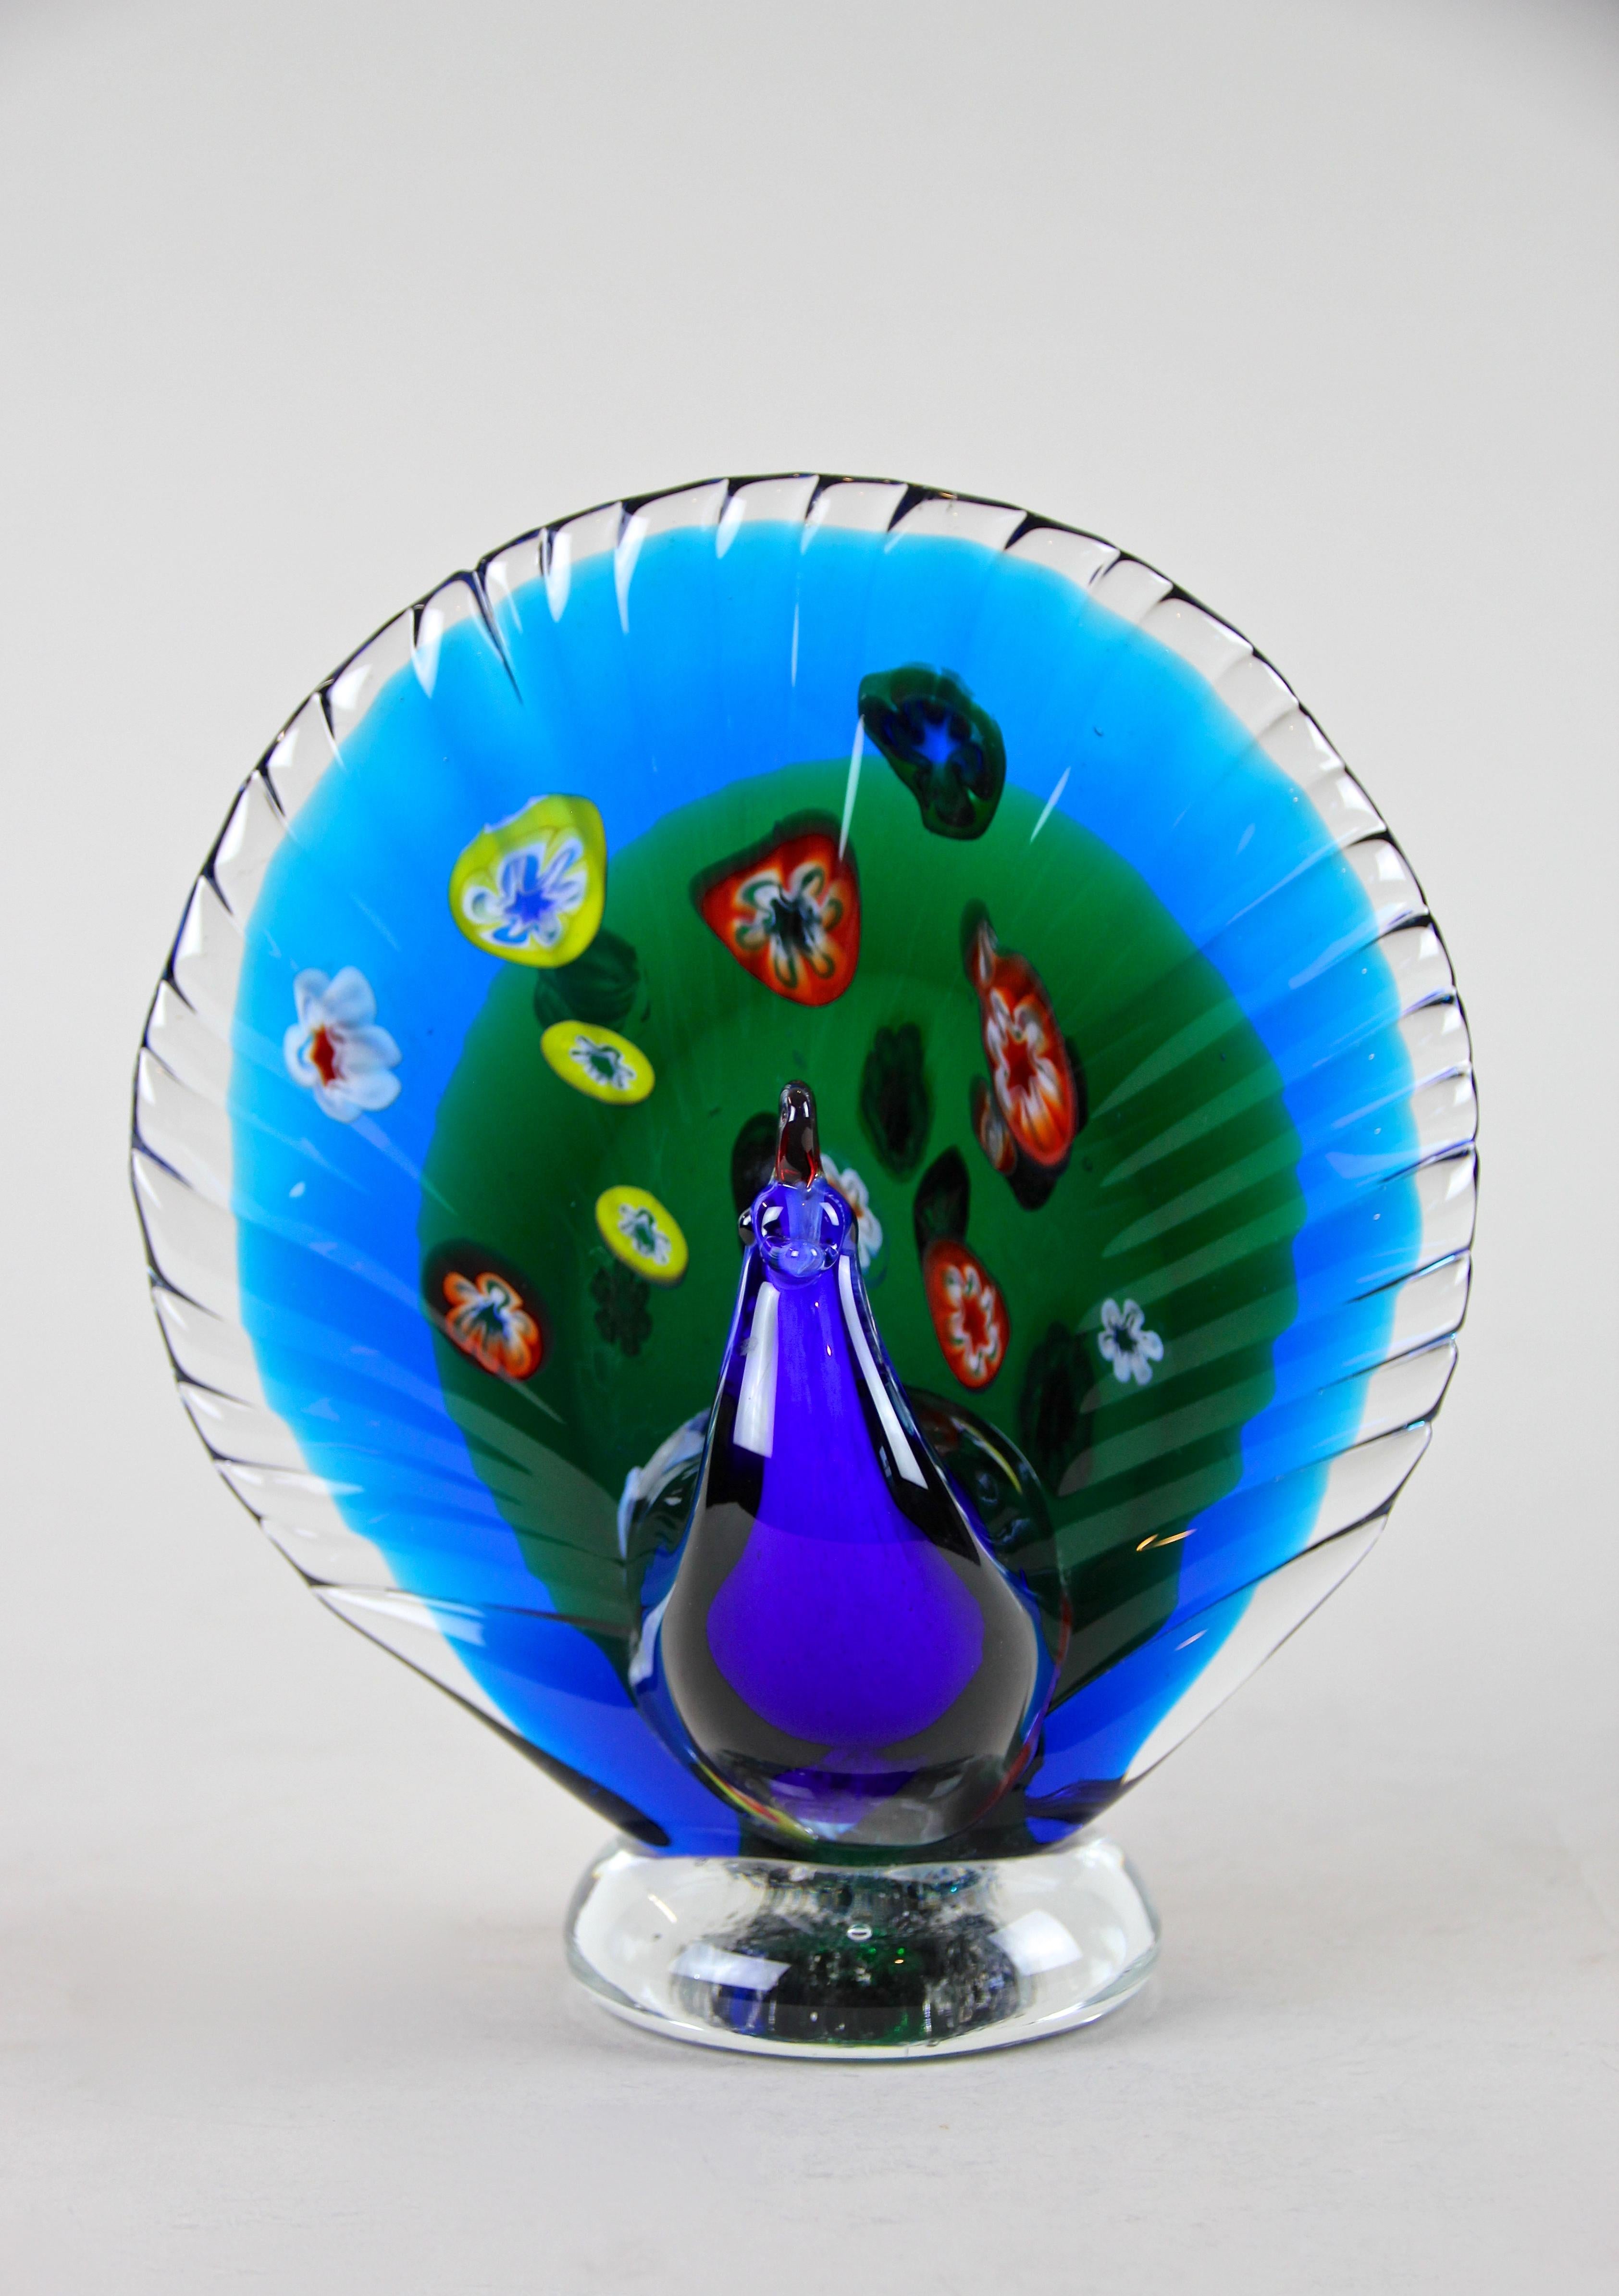 Lovely rare midcentury Murano glass peacock out of Italy. Coming from the 1960s this Murano animal sculpture impresses with an incredible design in shining blue and green tones. Additionally red, white, yellow and green flowers were set in the